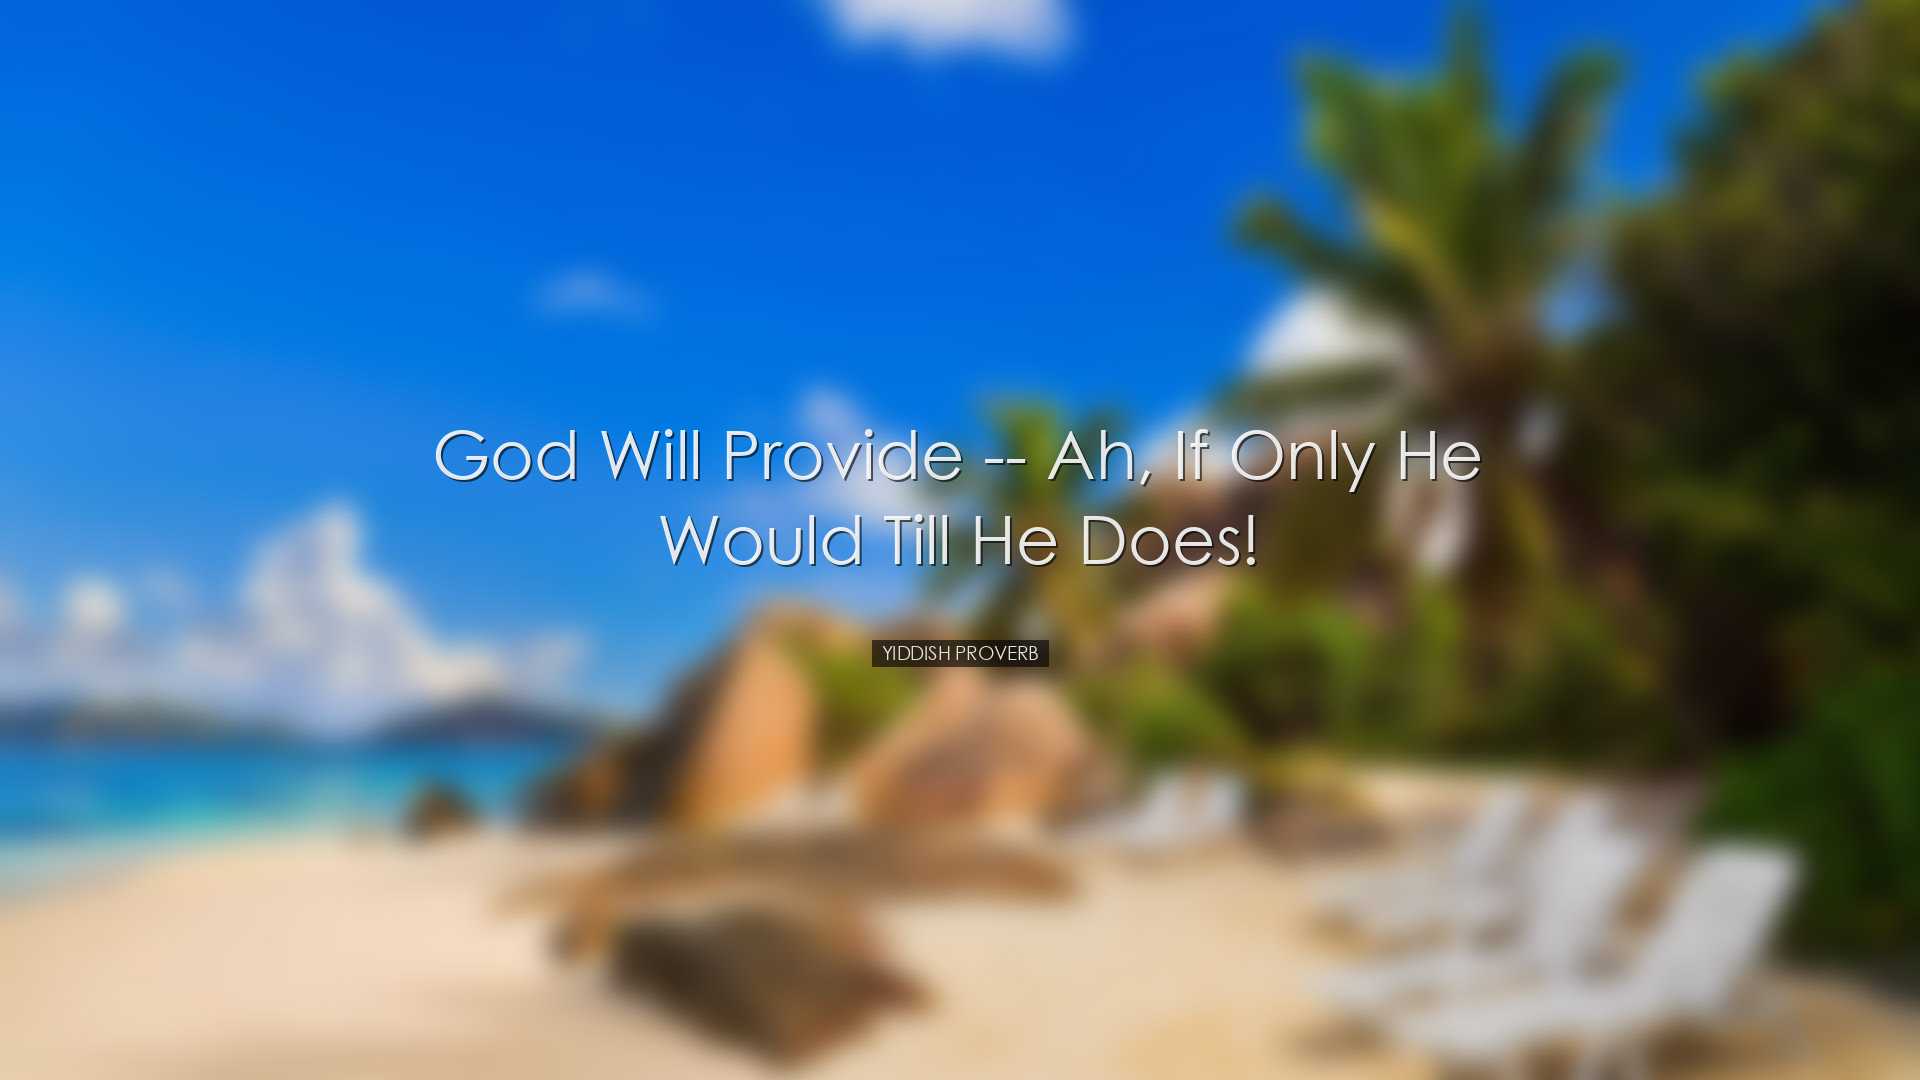 God will provide -- ah, if only He would till He does! - Yiddish P